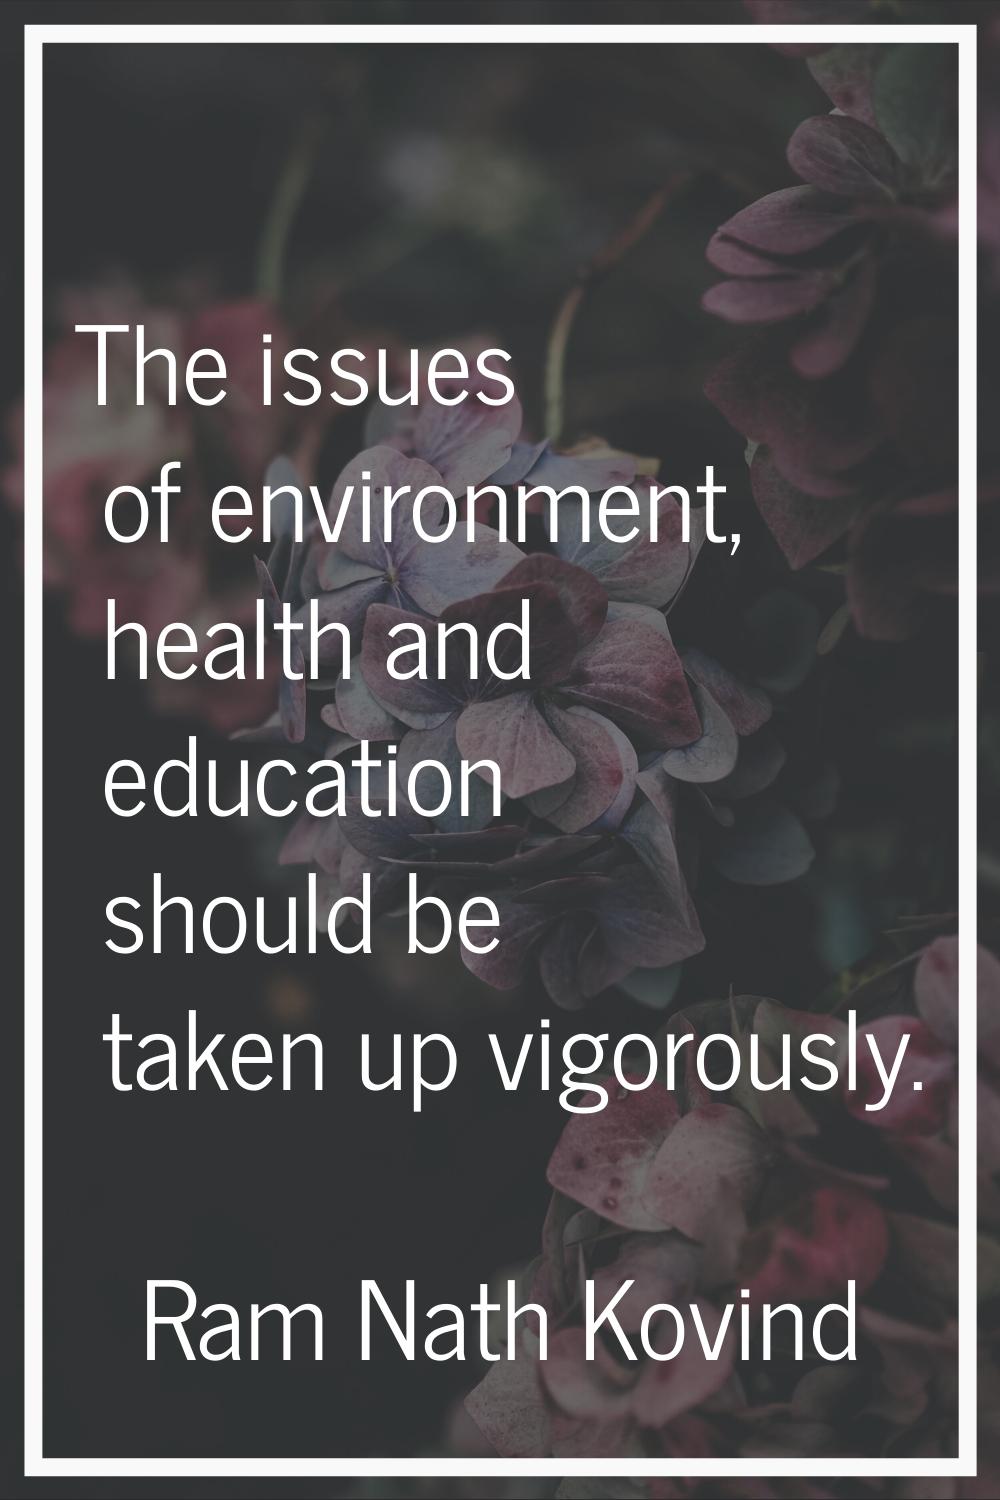 The issues of environment, health and education should be taken up vigorously.